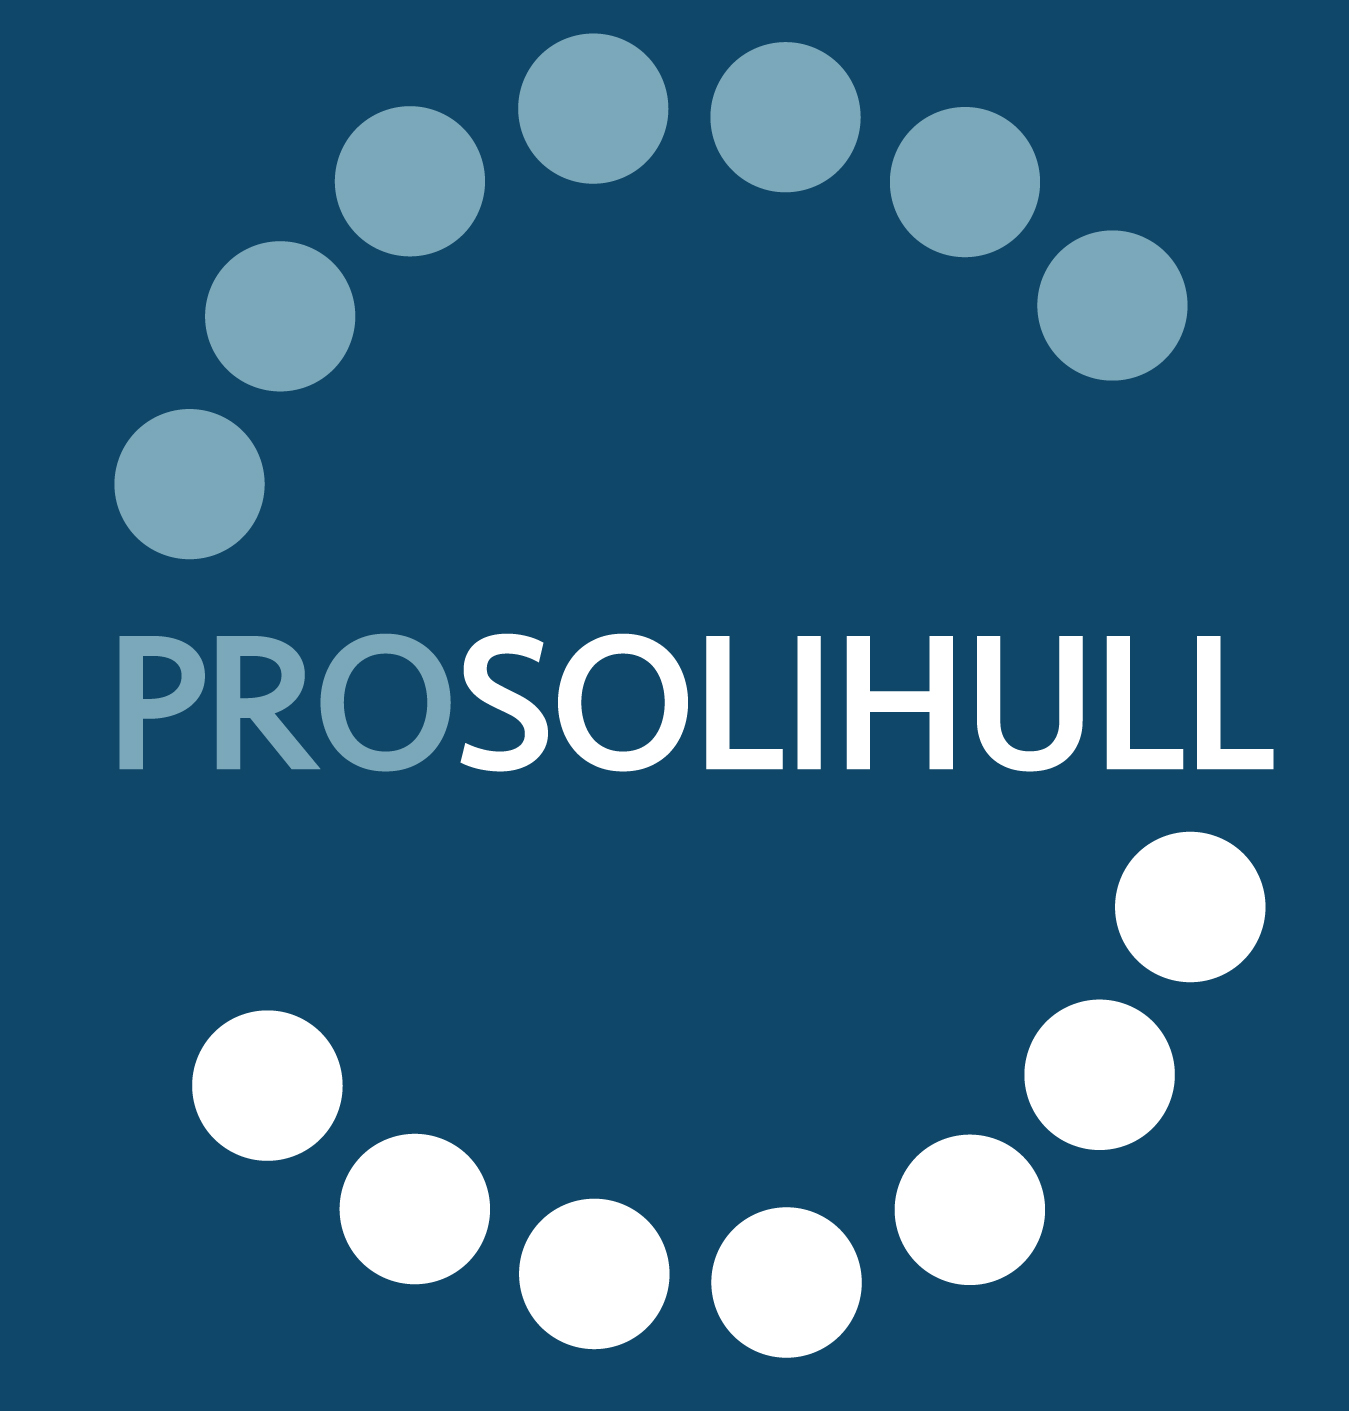 Pro Solihull - Solihull Professionals group - Solihull Chamber of Commerce